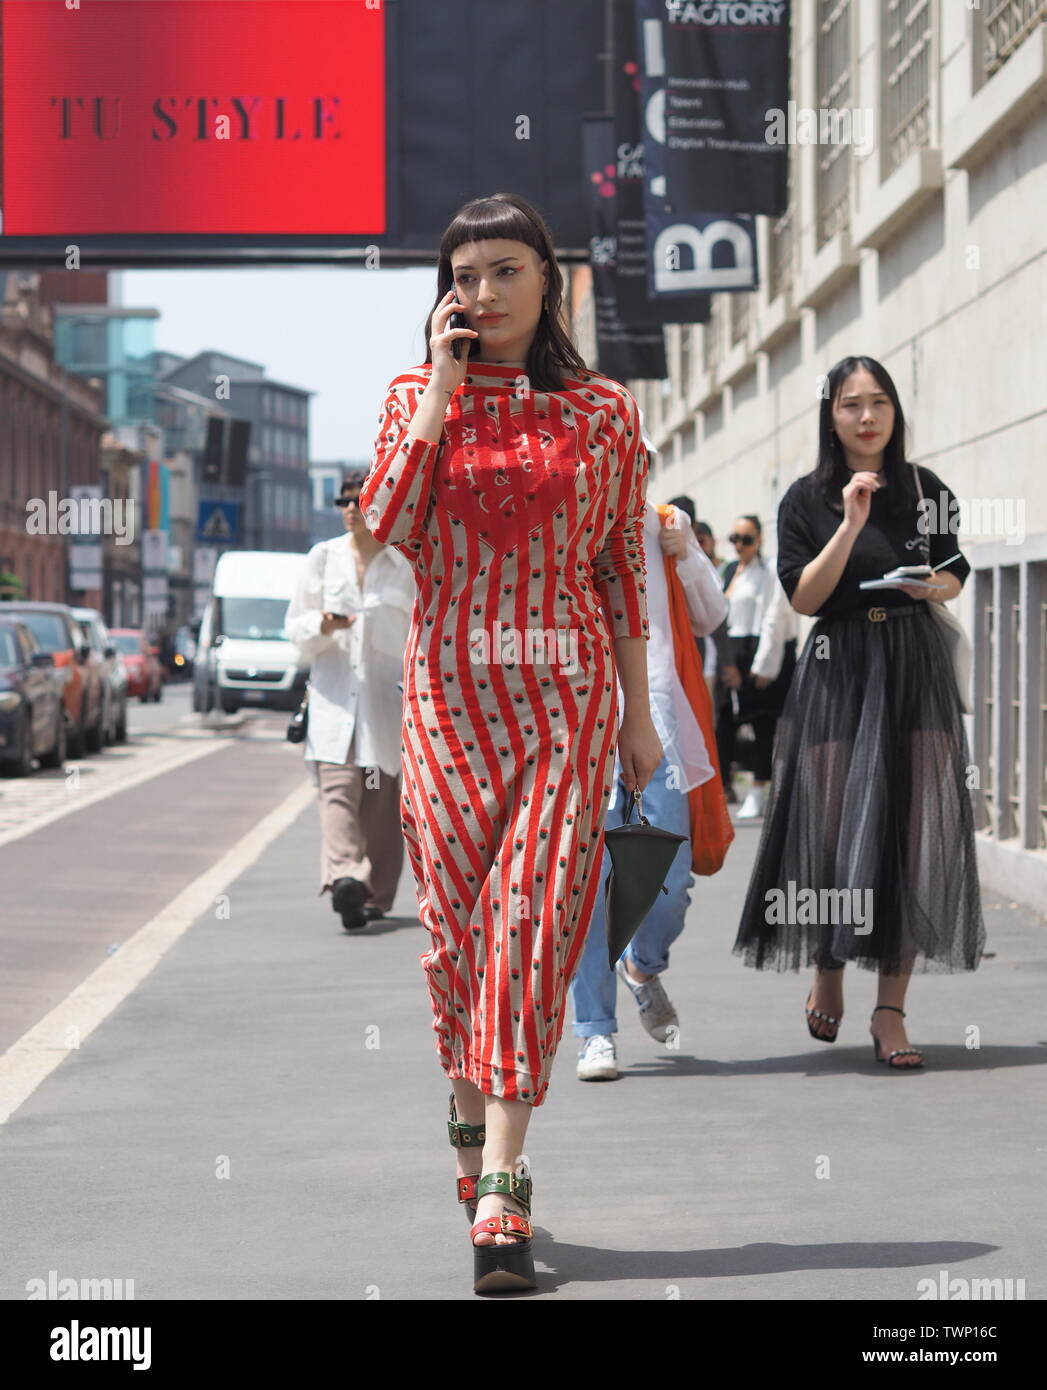 MILANO, Italy: 15 June 2019: Marta Festa street style outfit after Magliano  fashion show during Milano Fashion Week man 2019/2020 Stock Photo - Alamy